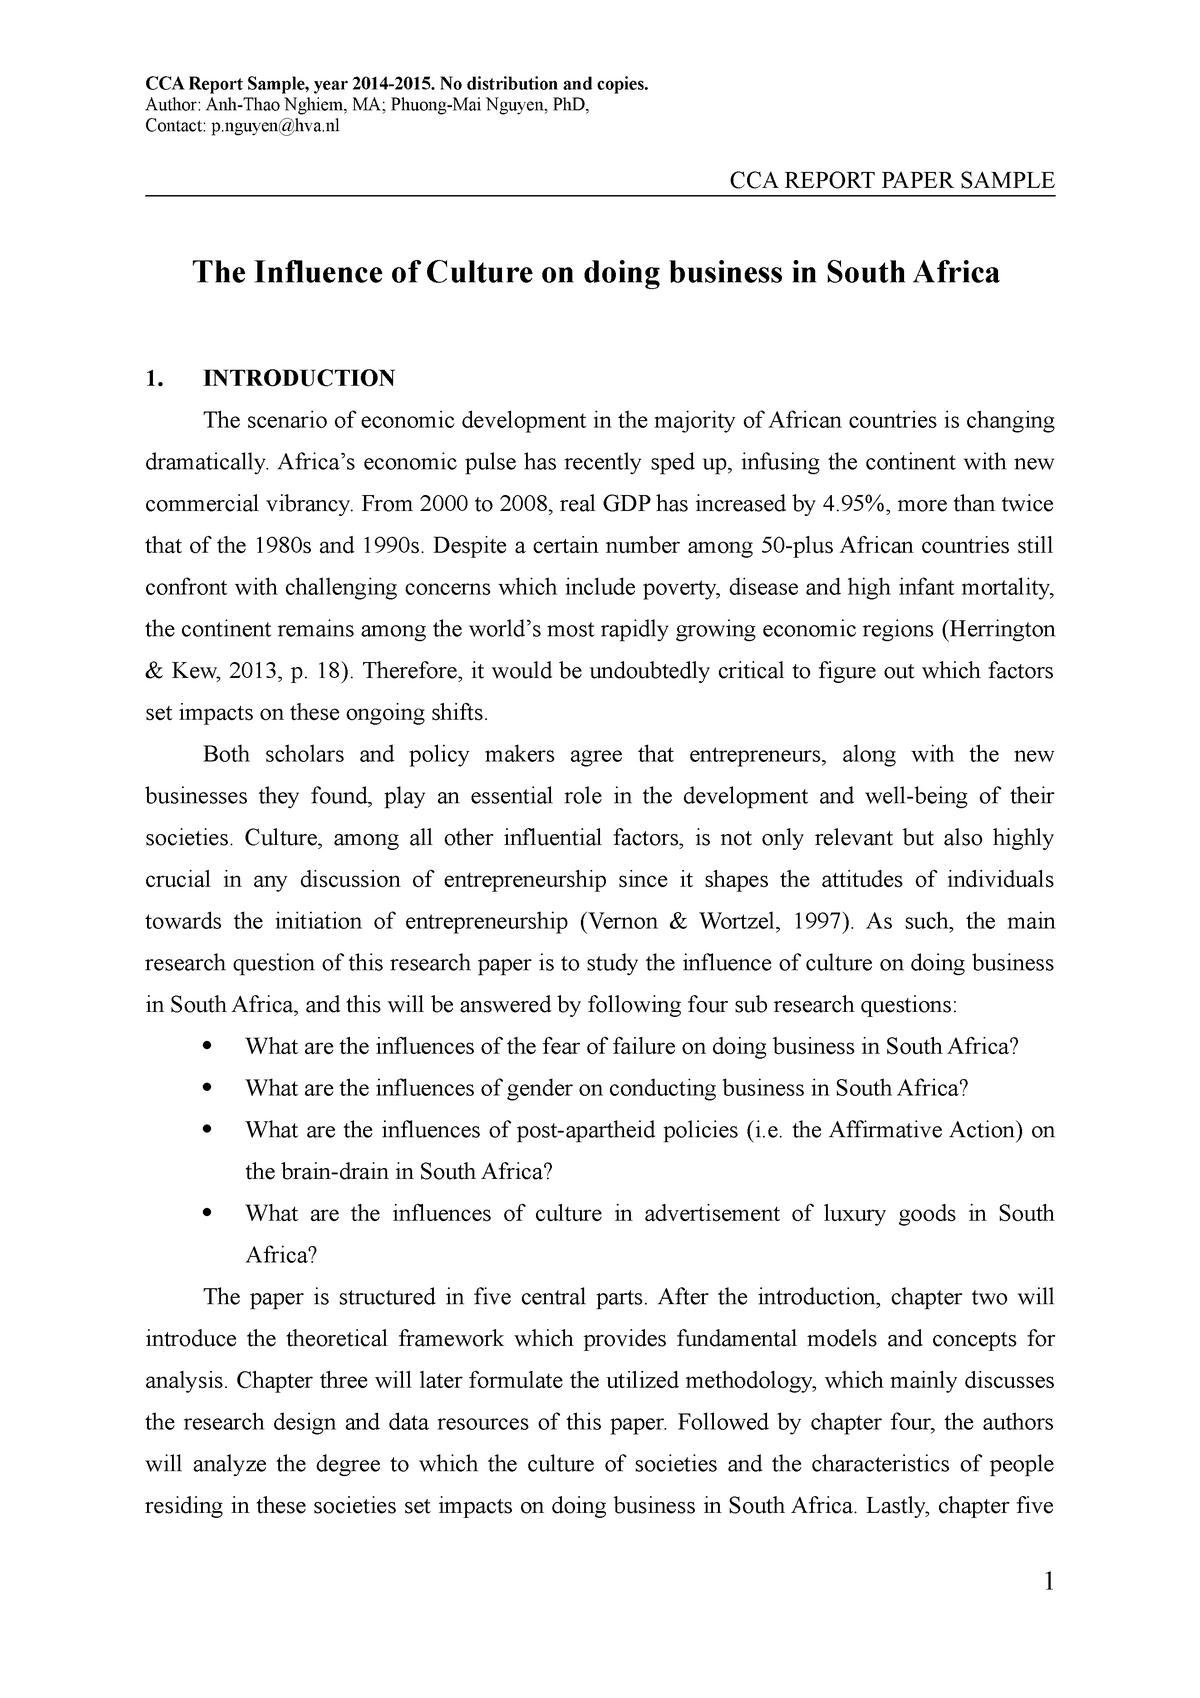 south africa's cultural diversity essay 300 words